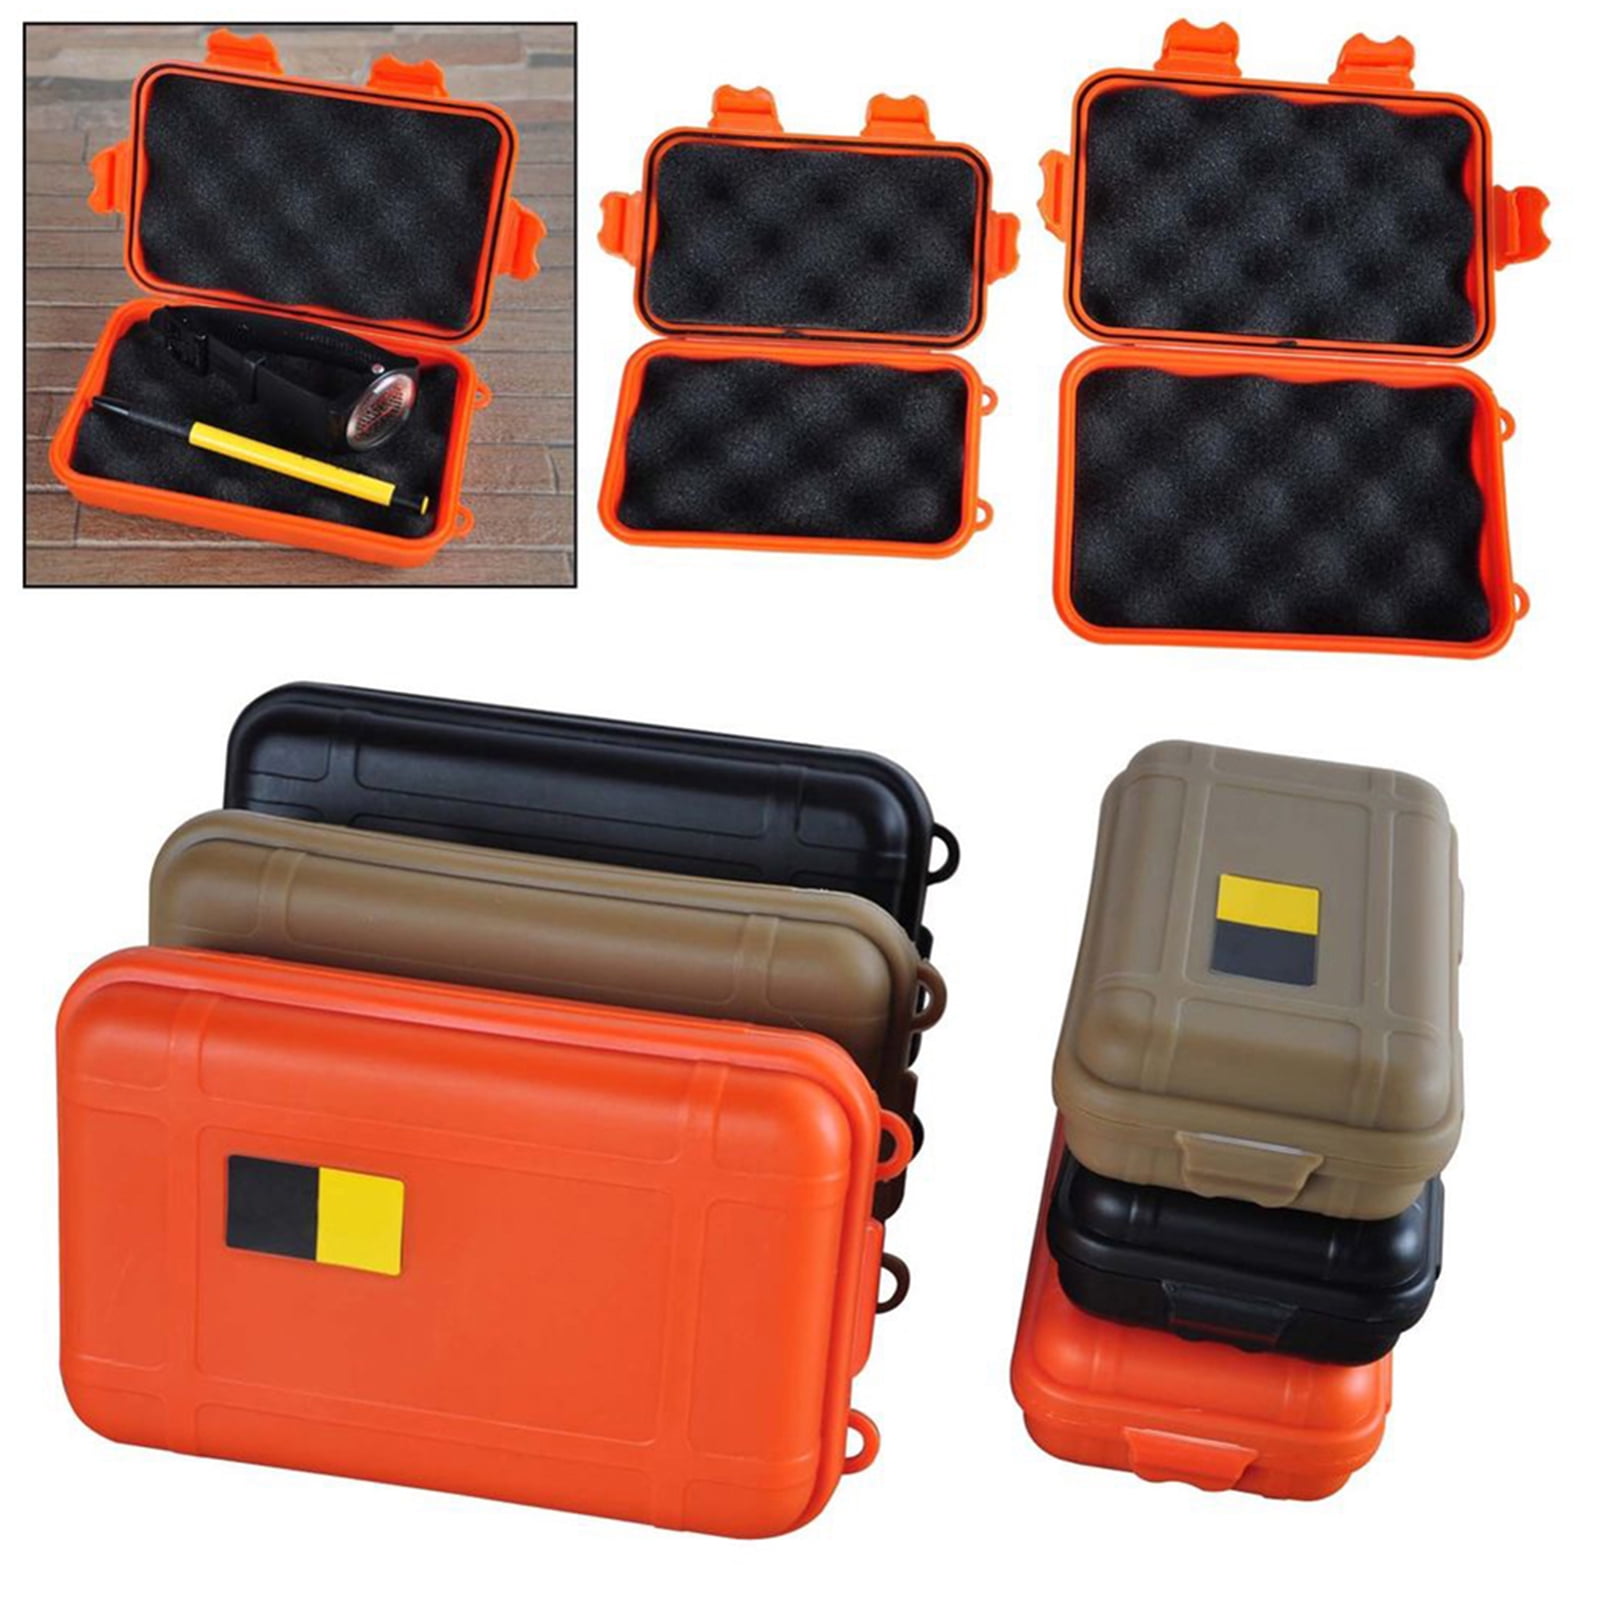 Waterproof Shockproof Plastic Outdoor Survival Storage  Container Carry Box New 